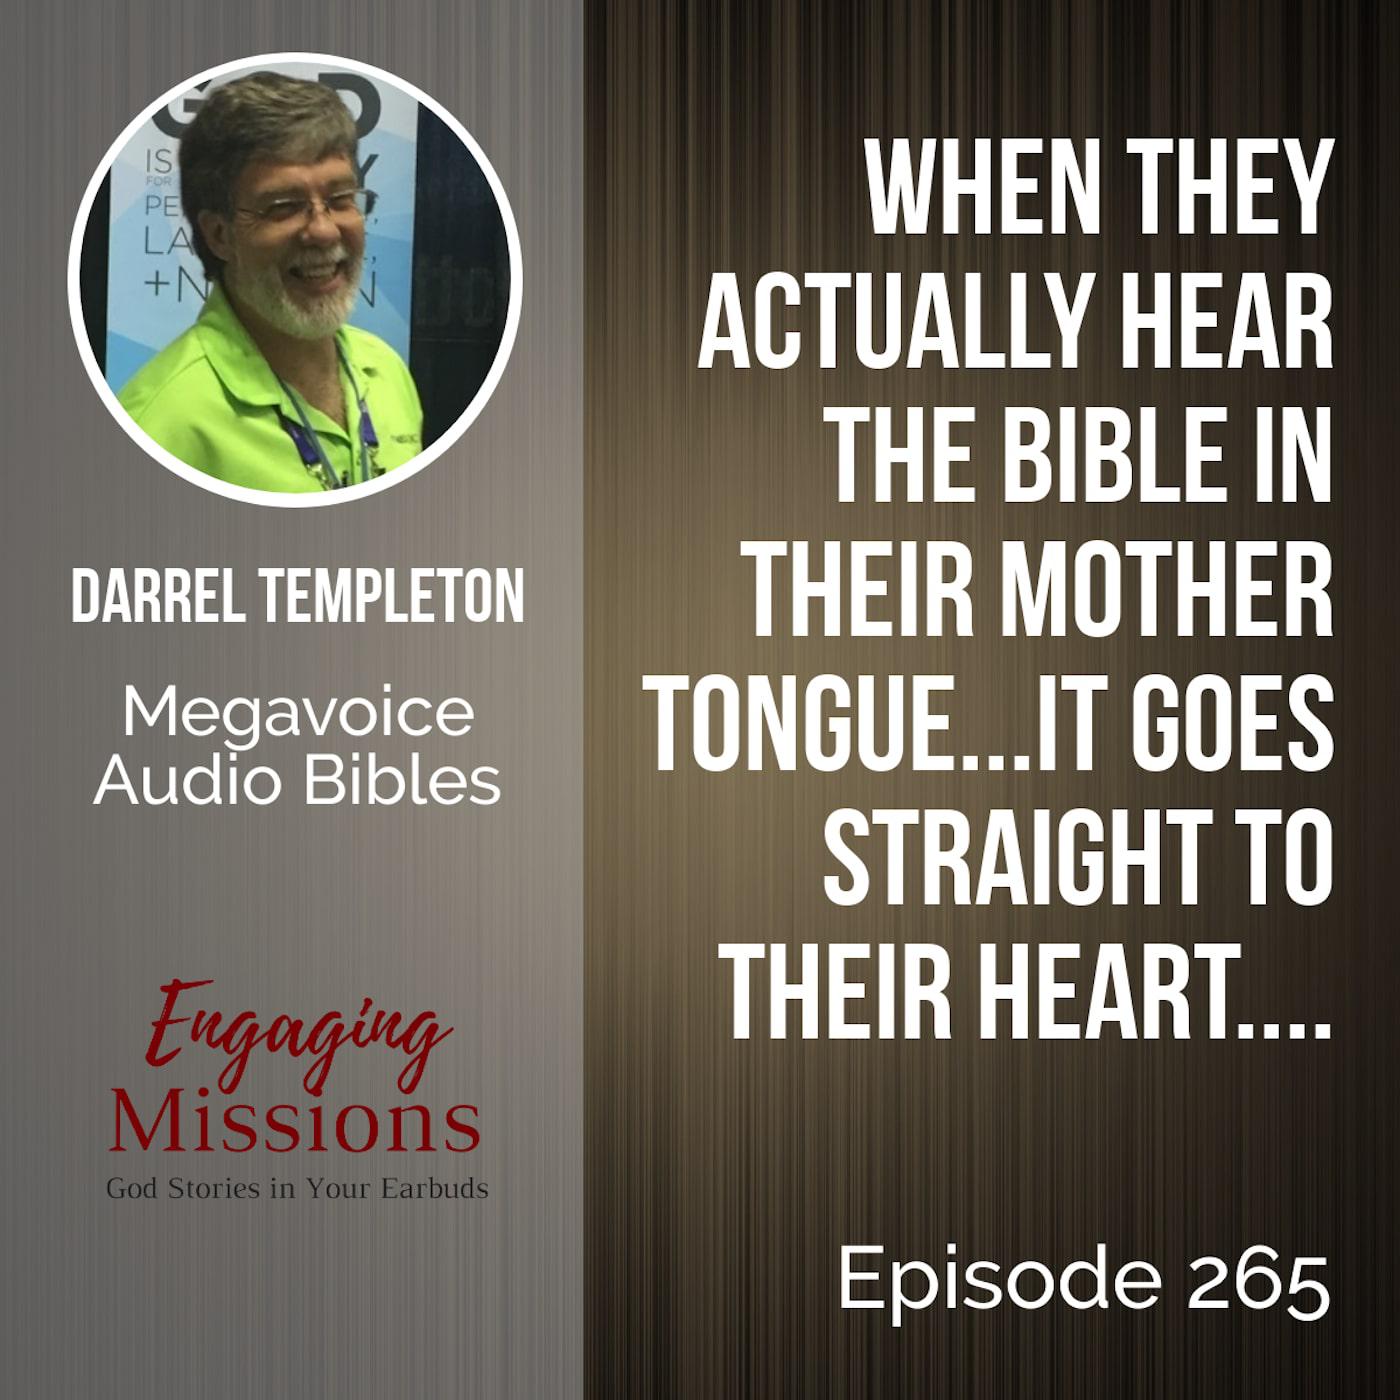 How to Share the Good News in Someone’s Heart Language, with Darrel Templeton of Megavoice – EM265